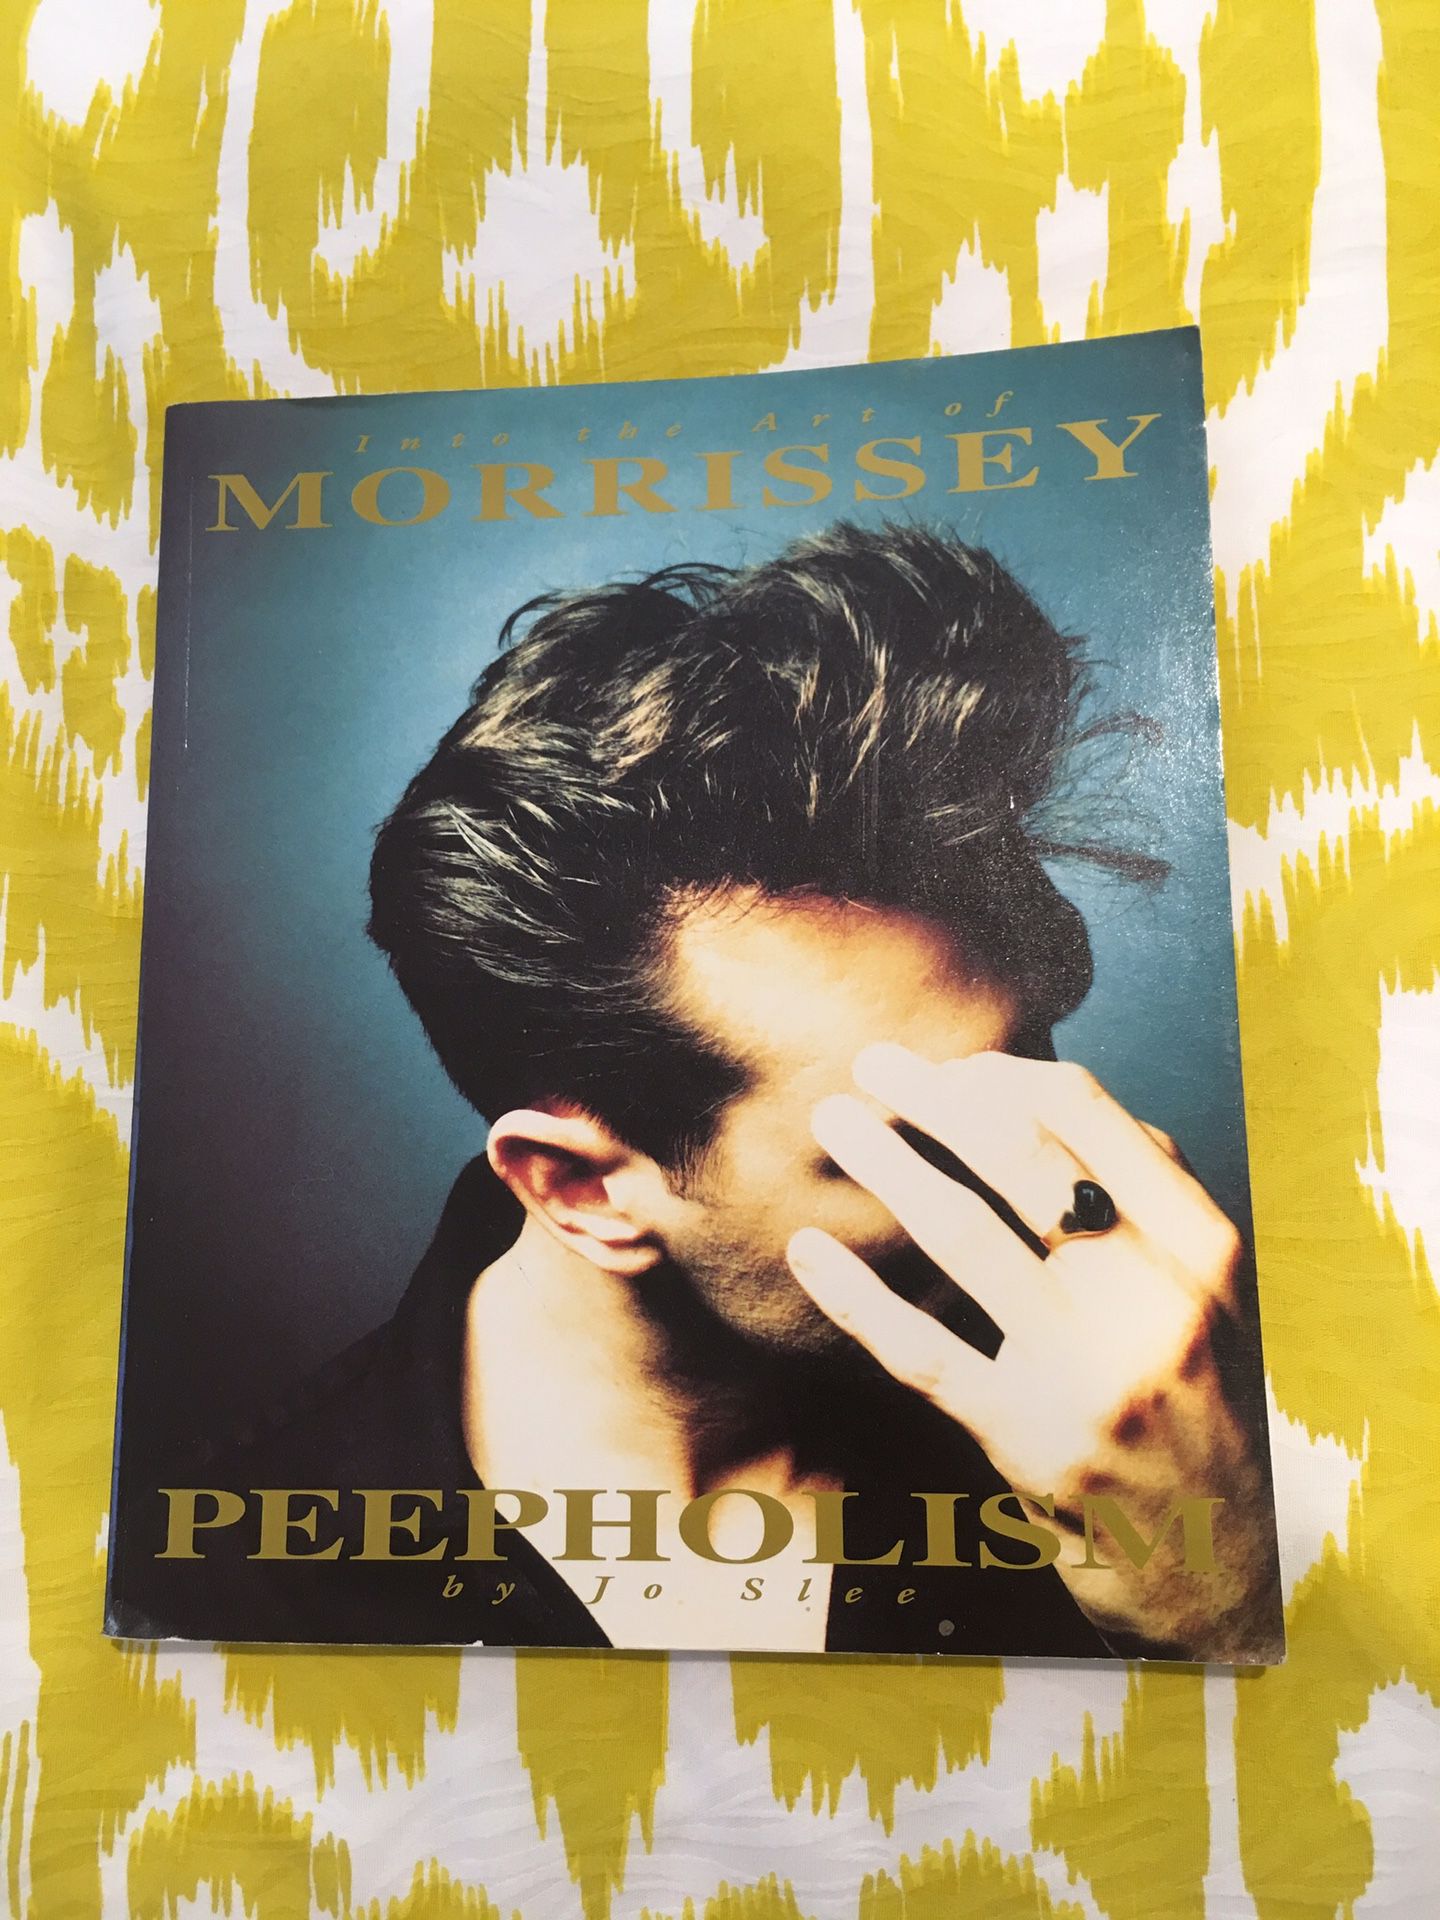 Morrissey book—Peepholism Into the Art Of Morrissey by Jo Slee, Very good 1st edition 1994